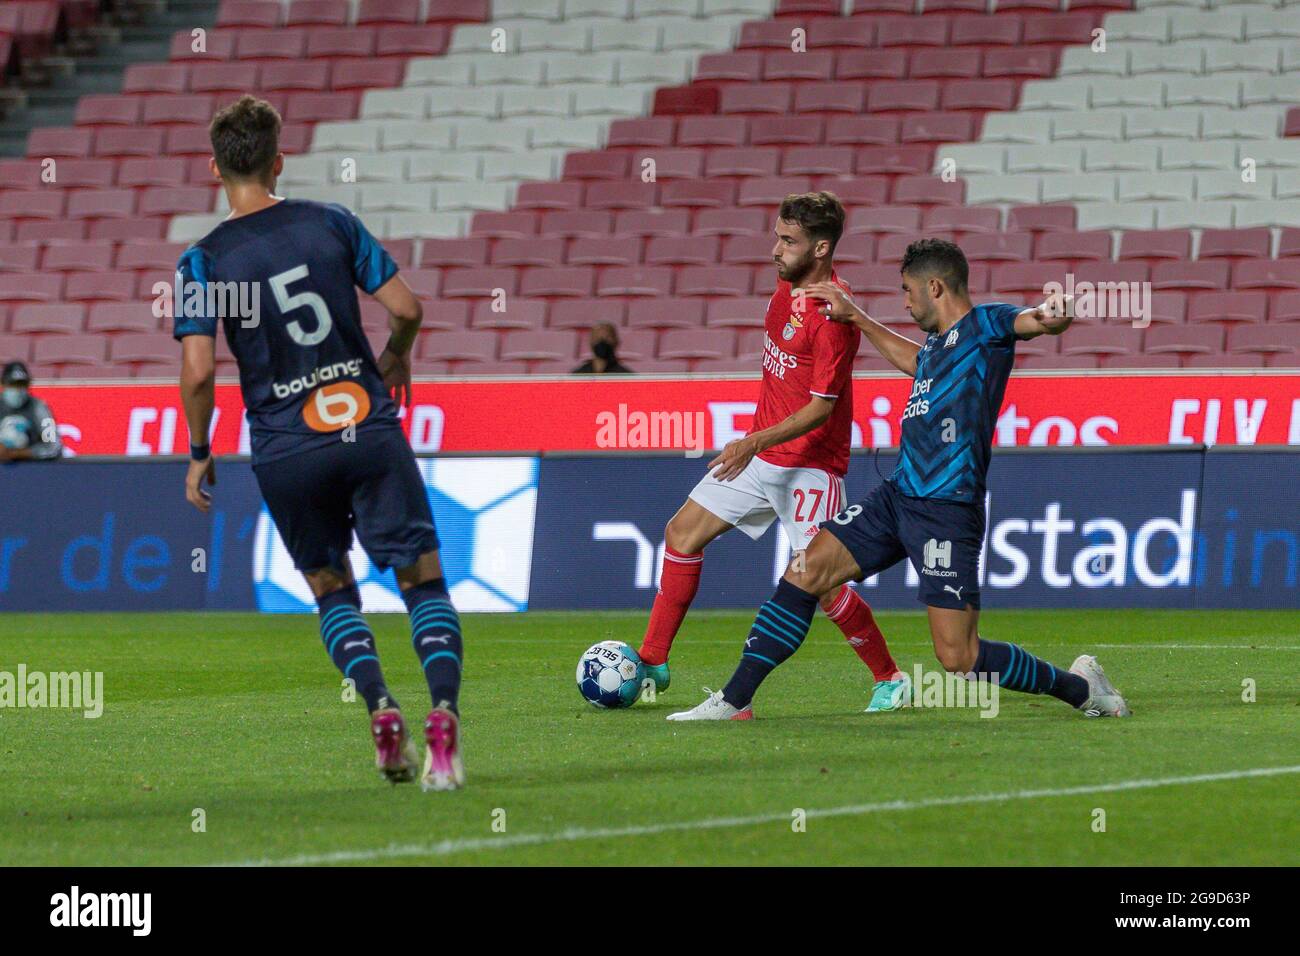 July 25, 2021. Lisbon, Portugal. Benfica's forward from Portugal Rafa Silva (27) and Marseille's defender from Spain Alvaro Gonzalez (3) in action during the friendly game between SL Benfica vs Olympique Marseille Credit: Alexandre de Sousa/Alamy Live News Stock Photo